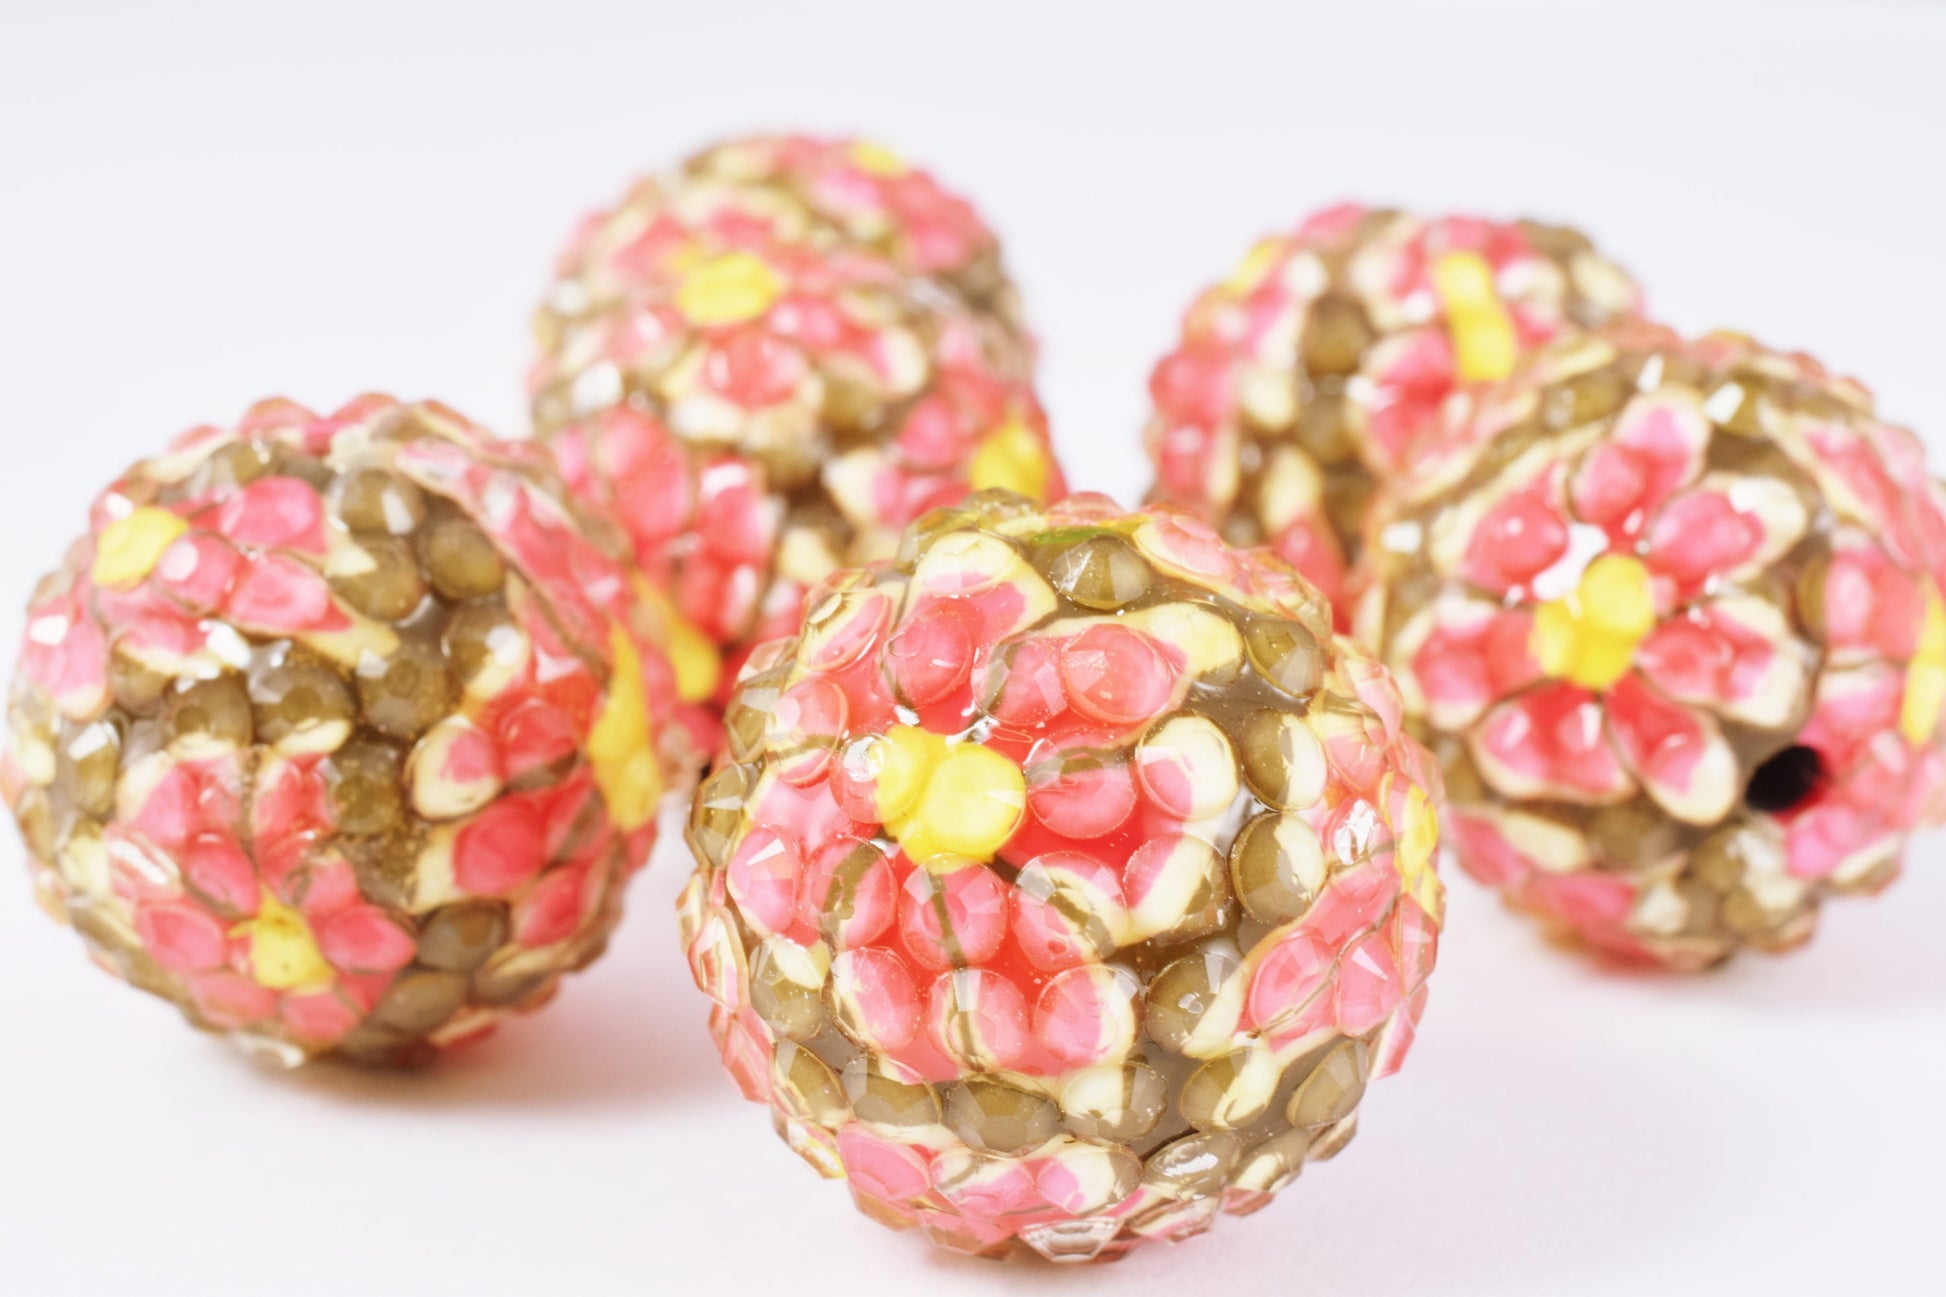 22mm Hot Pink Floral Print Resin Wooden Round Beads, Wooden beads, Wholesale Bead, Basketball Wives Bead,Rhinestone Beads,Resin beads